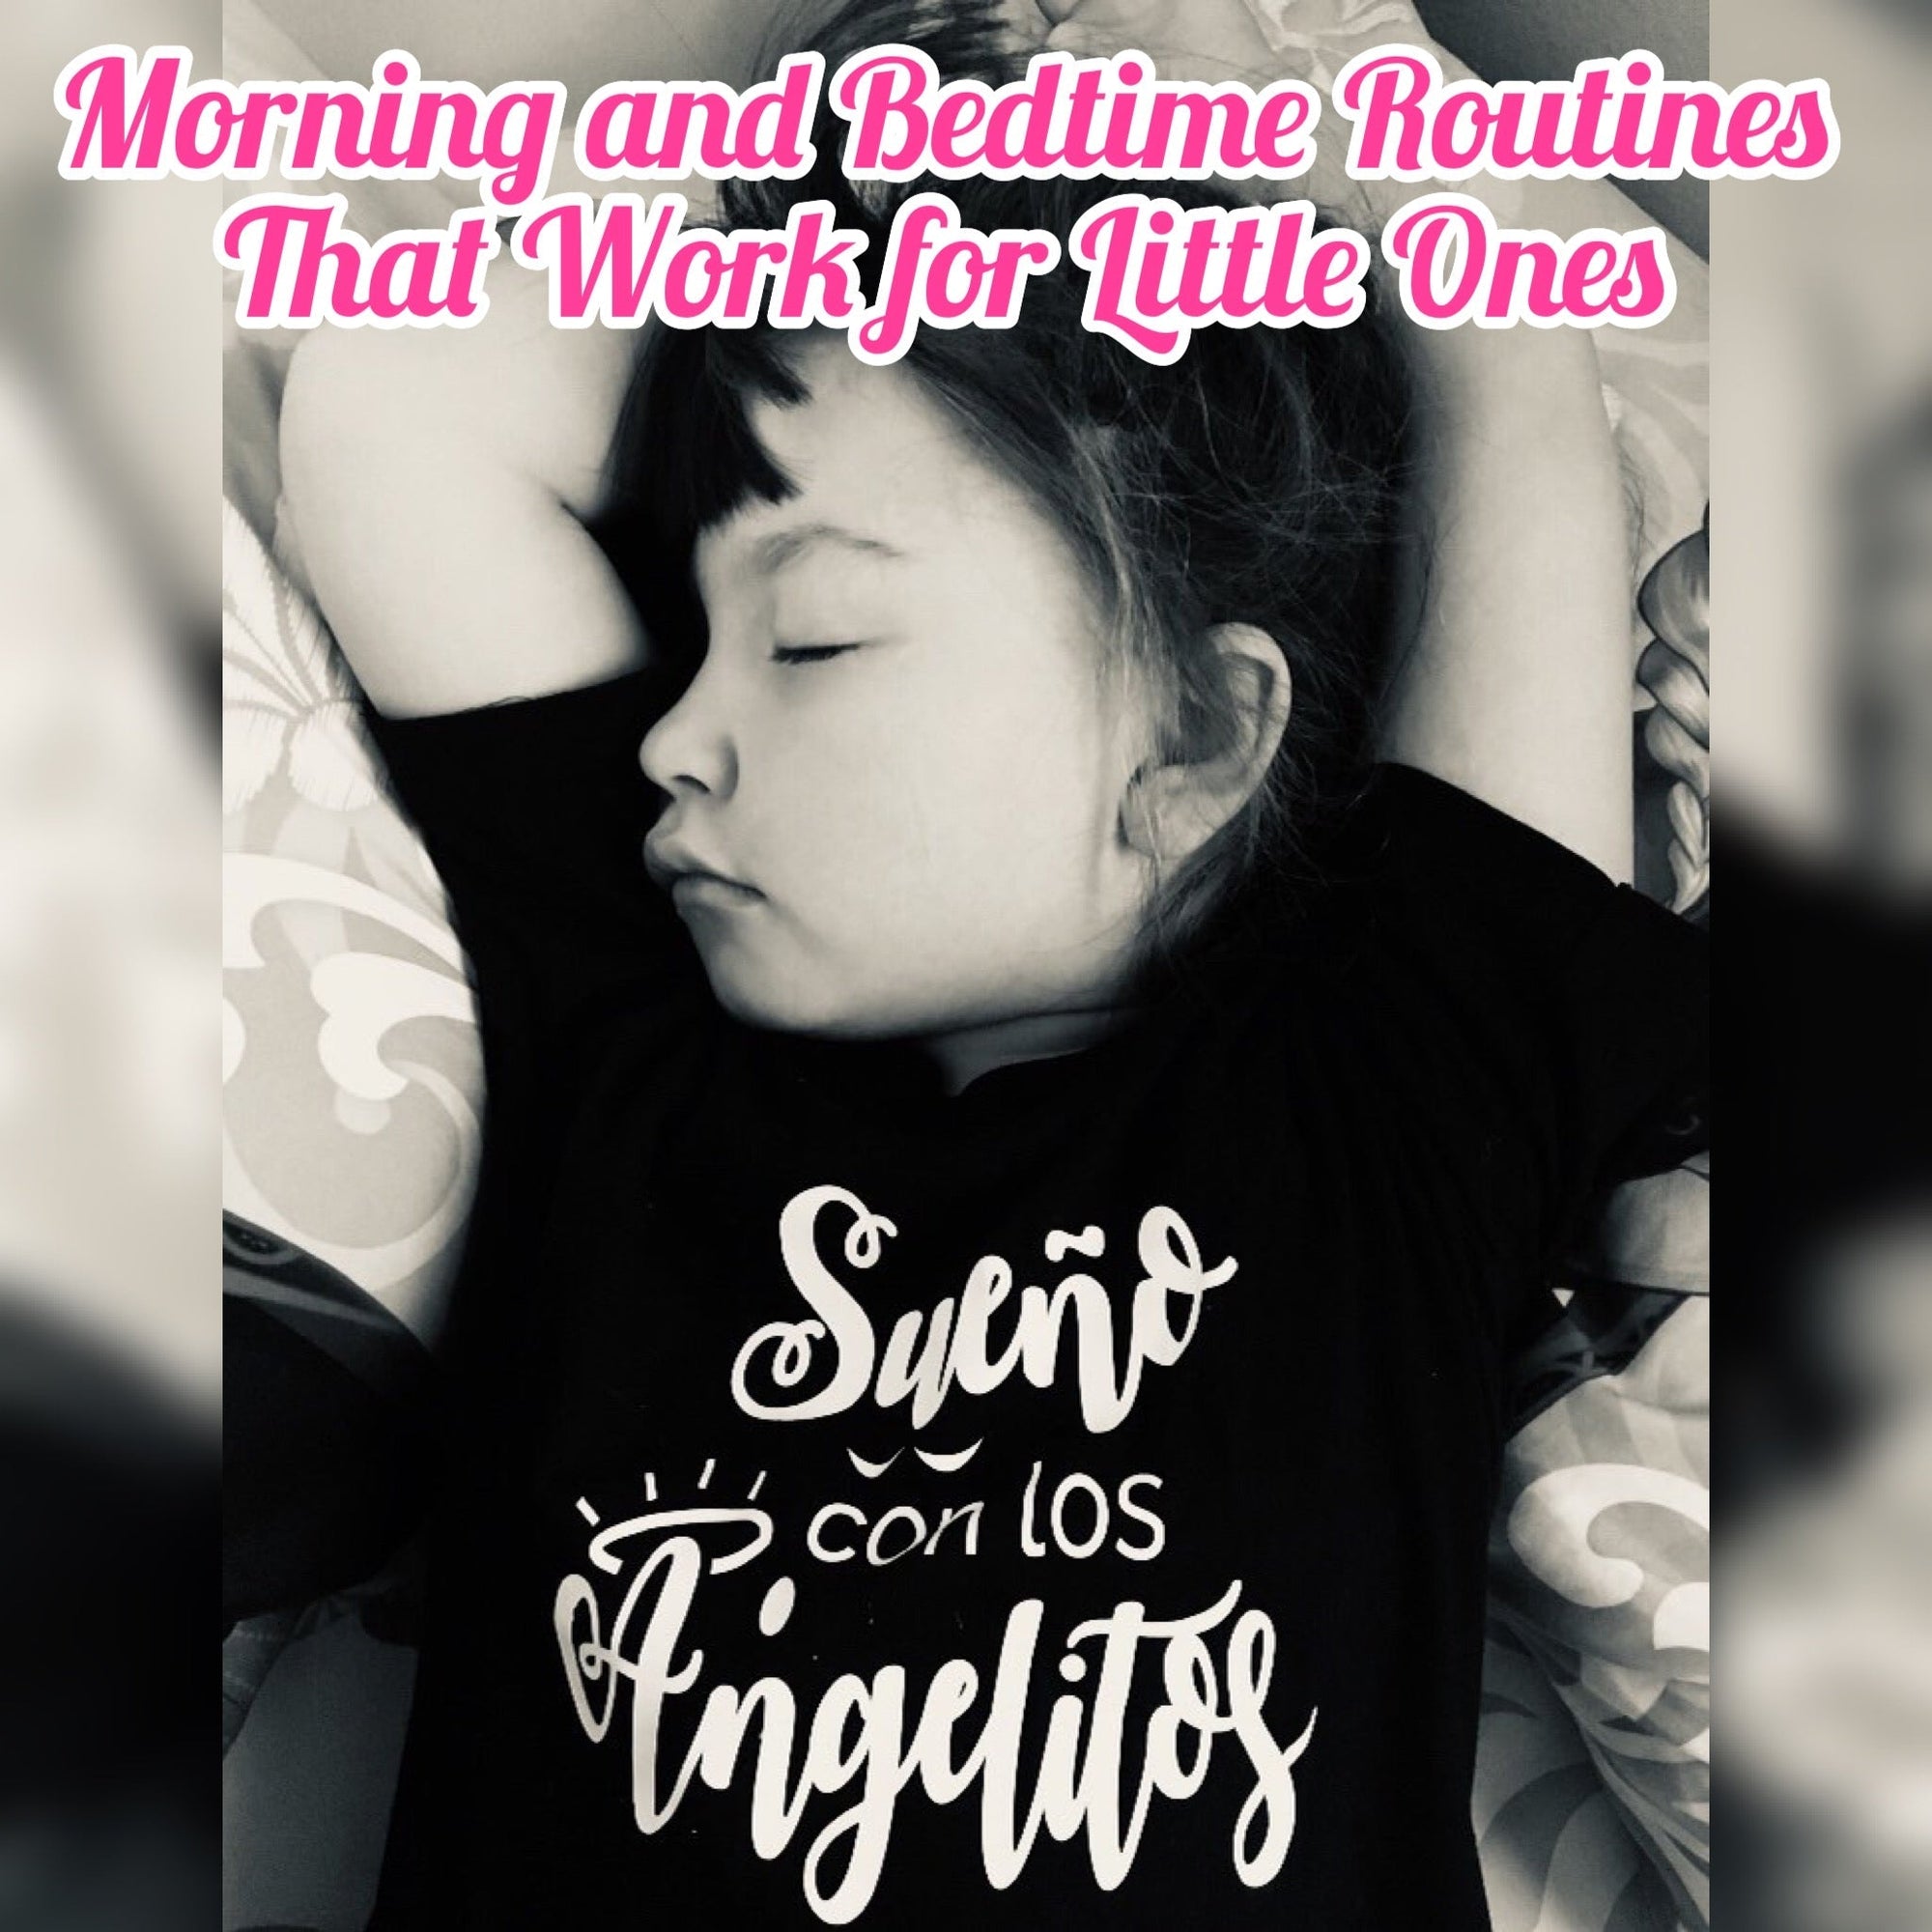 Morning and Bedtime Routines that Work for Young Kids - Mi LegaSi